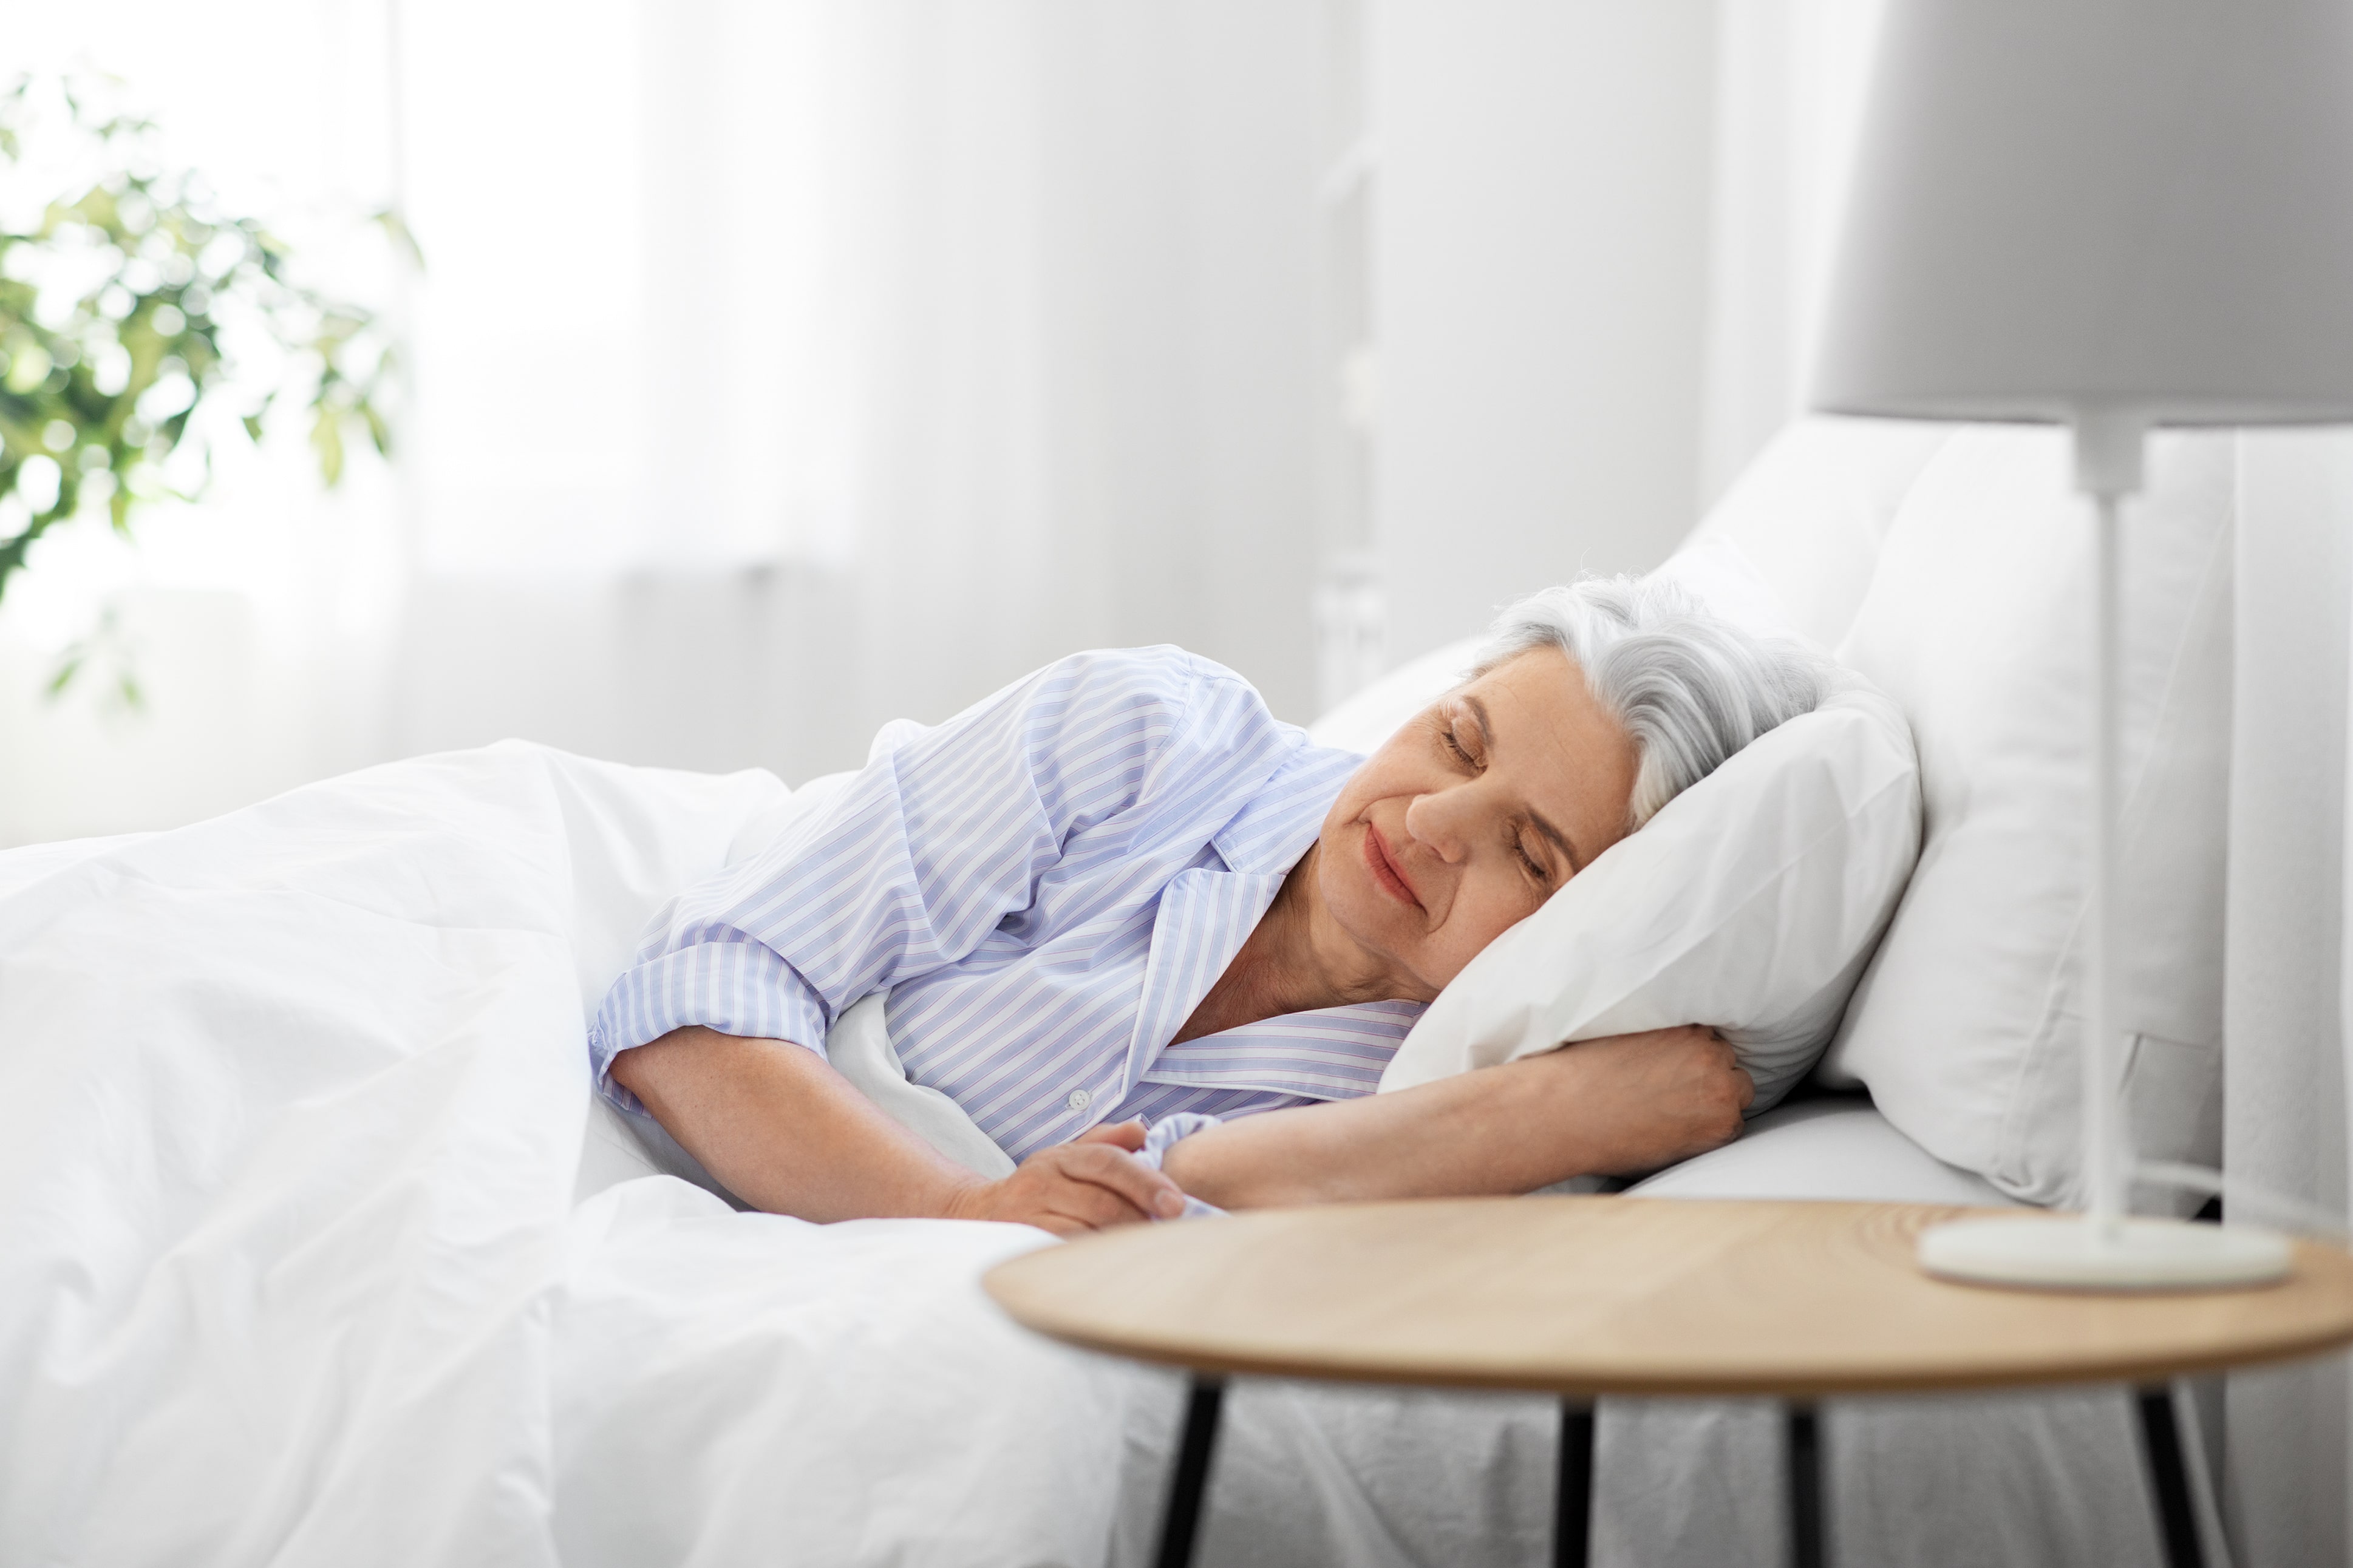 An older lady asleep on her side in bed and in the background is a green-leafed houseplant